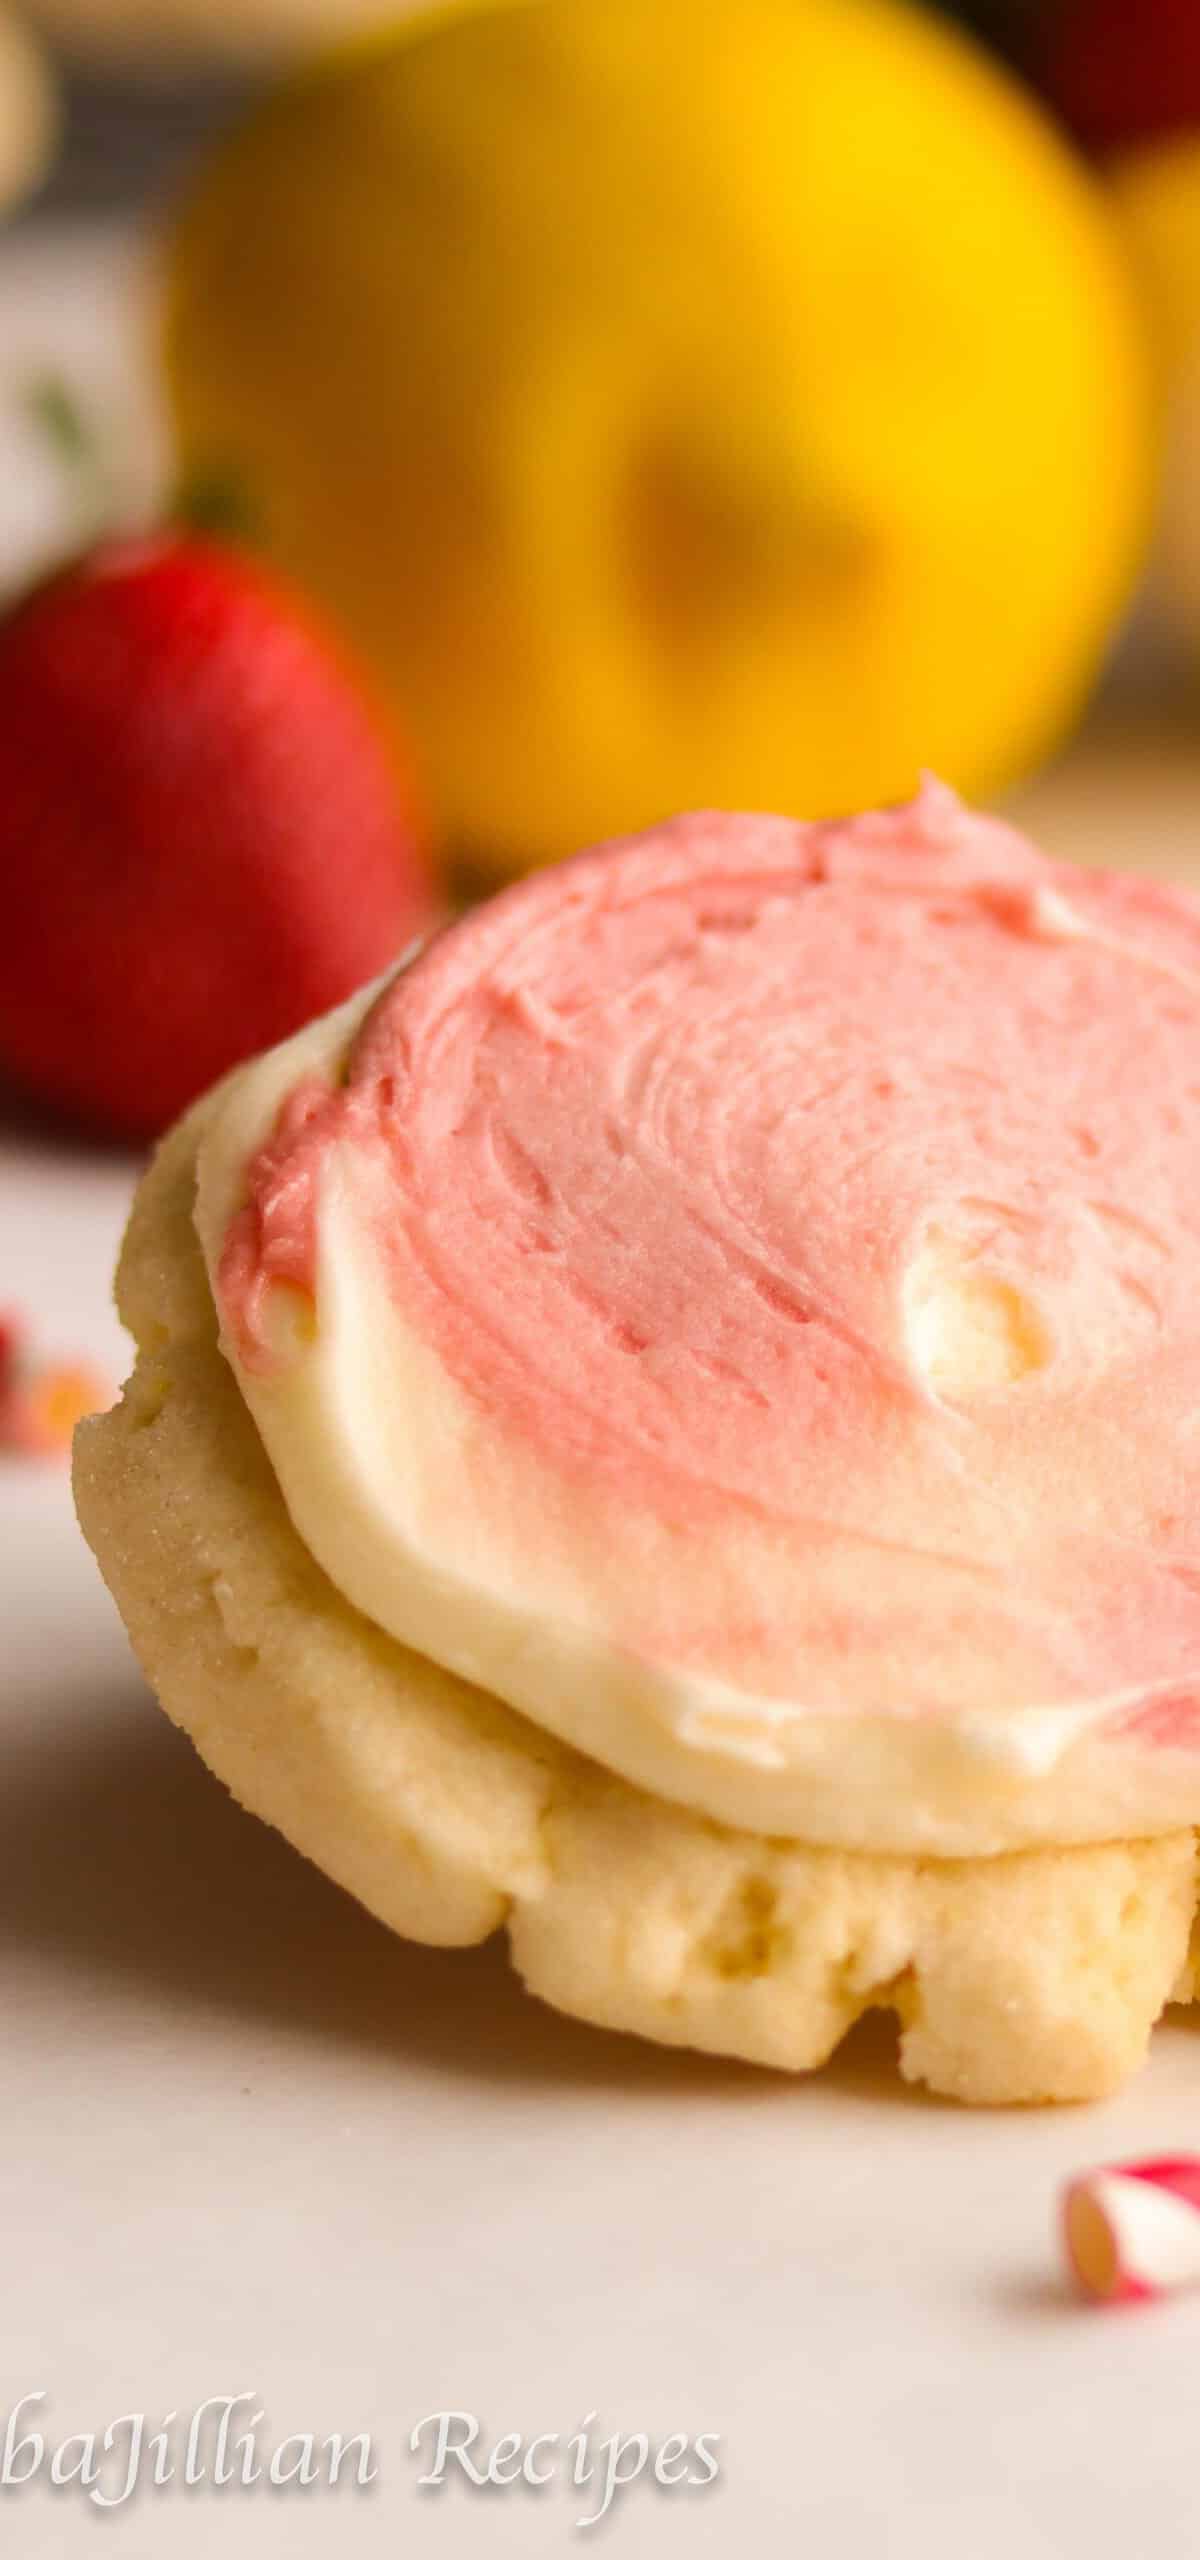  If you're a fan of fruity desserts, these cookies are a must-try.